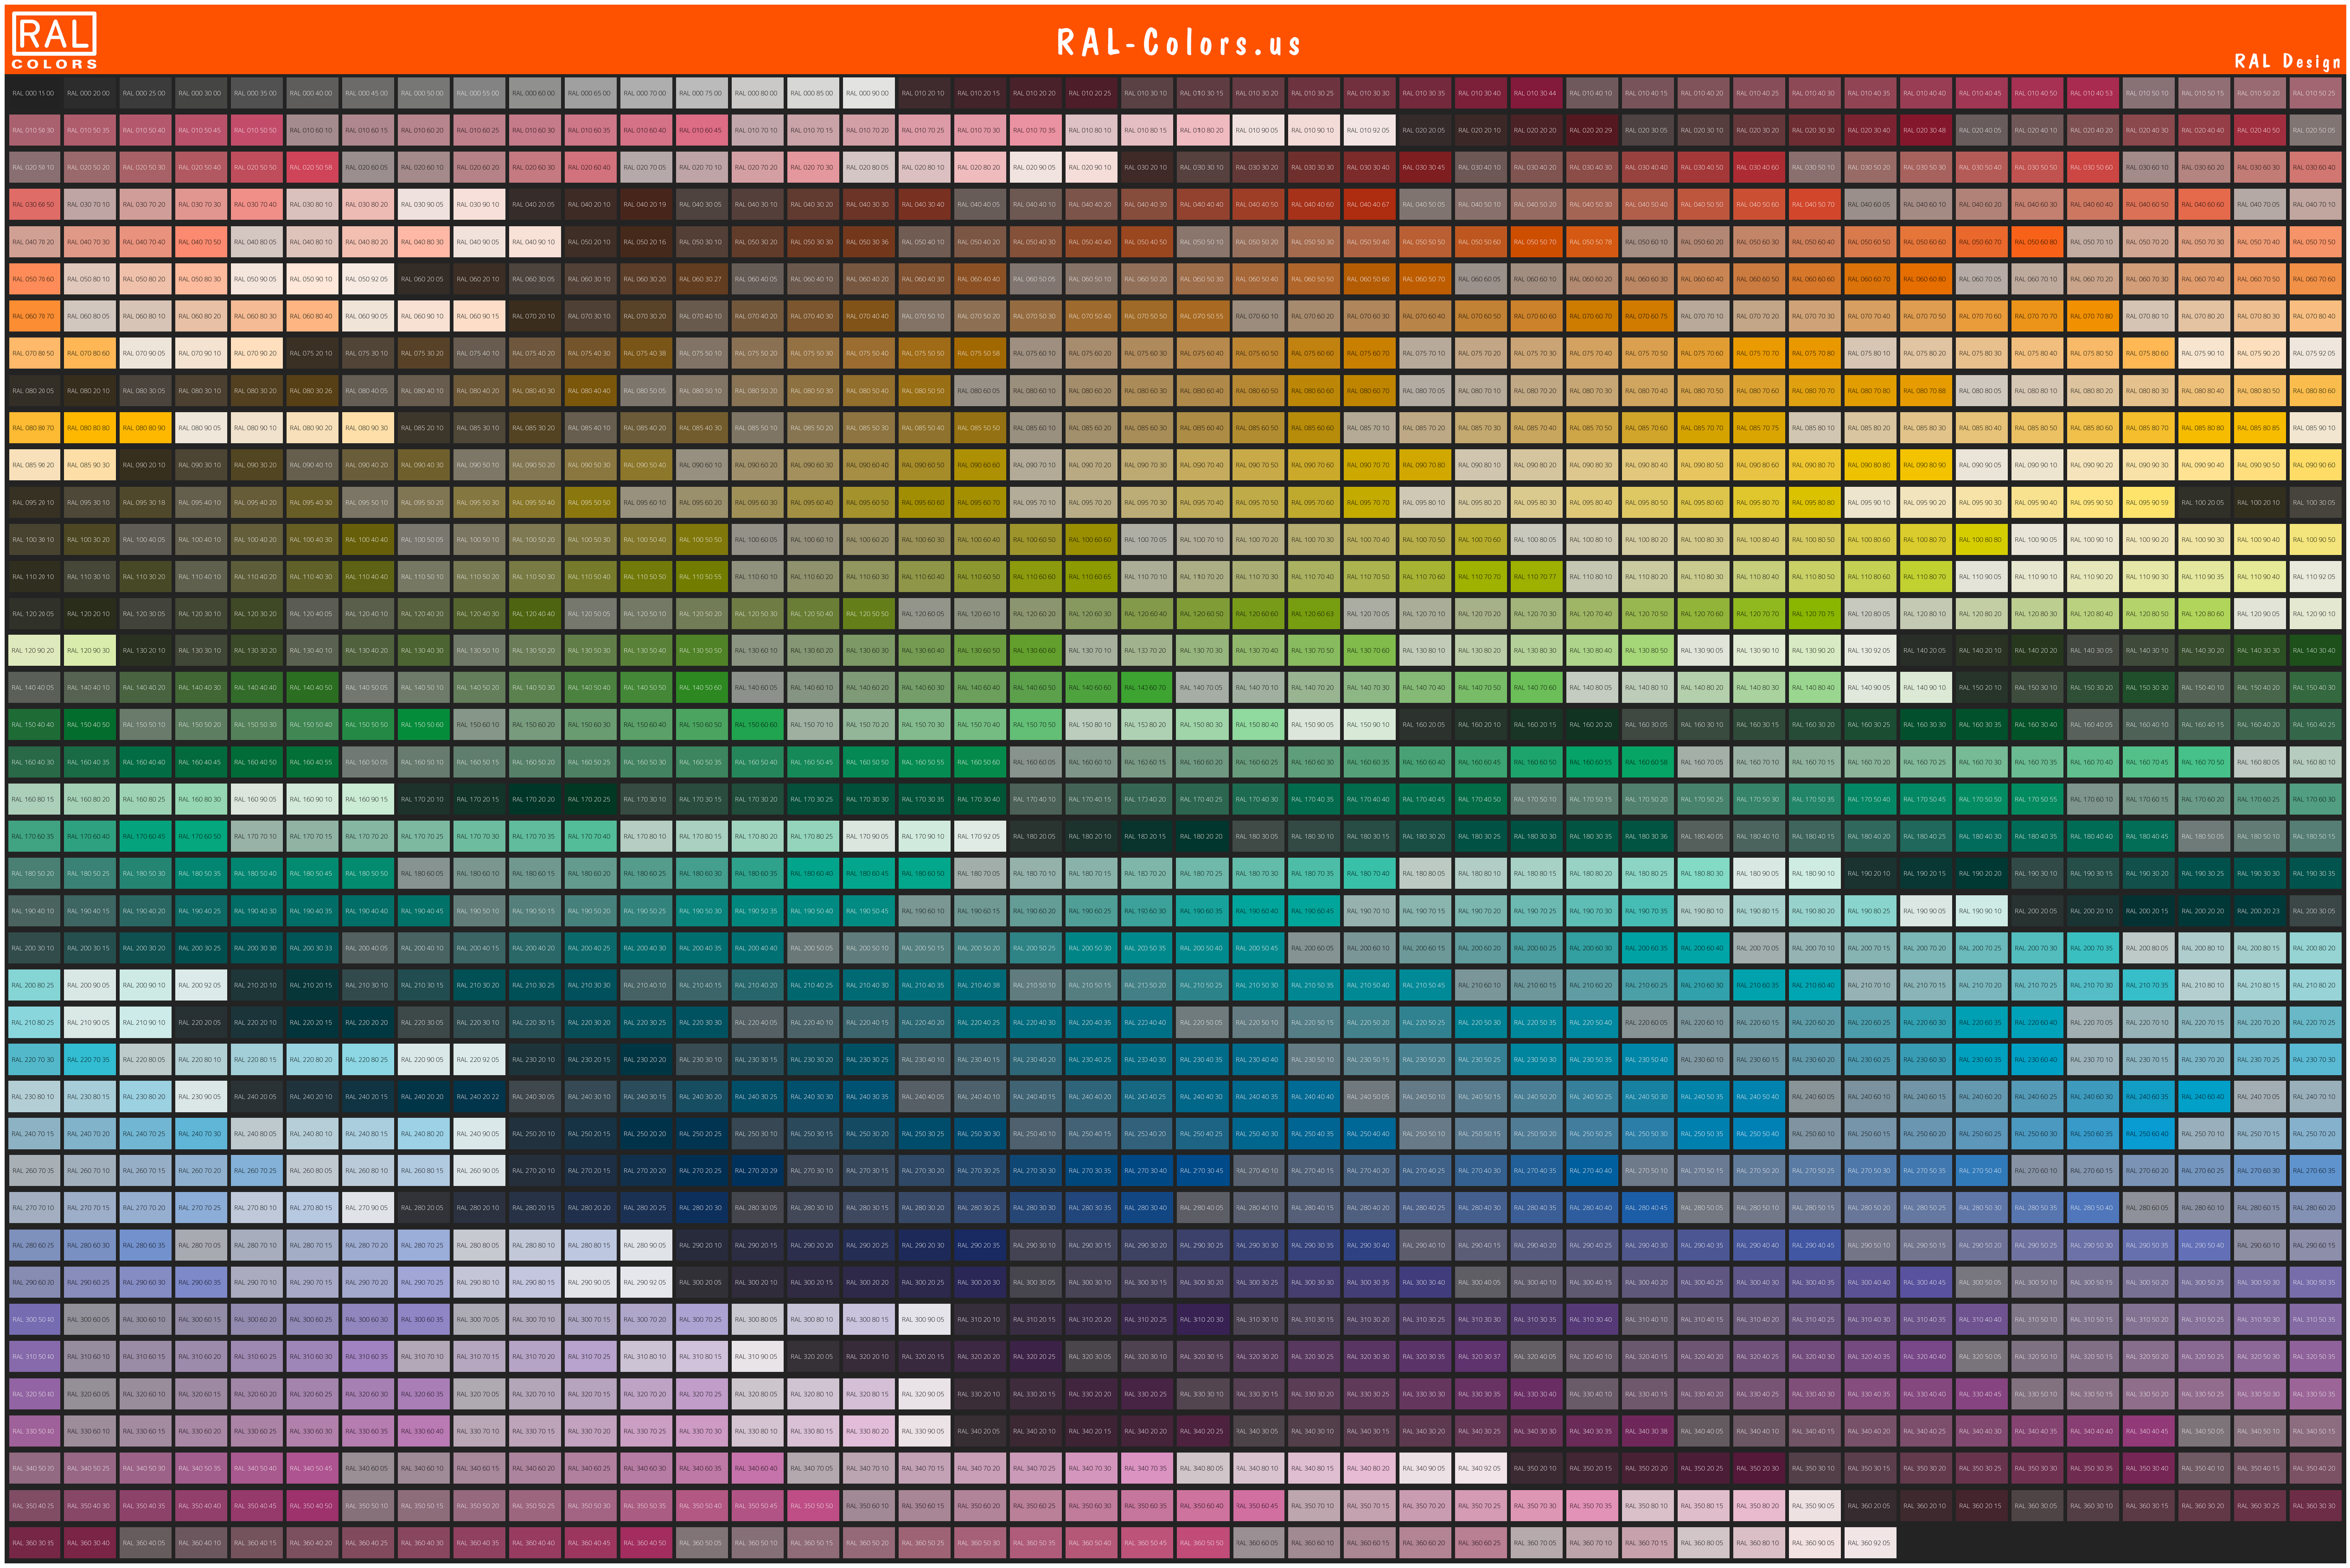 RAL Design Color chart with names and RAL to RGB / CMYK conversion info